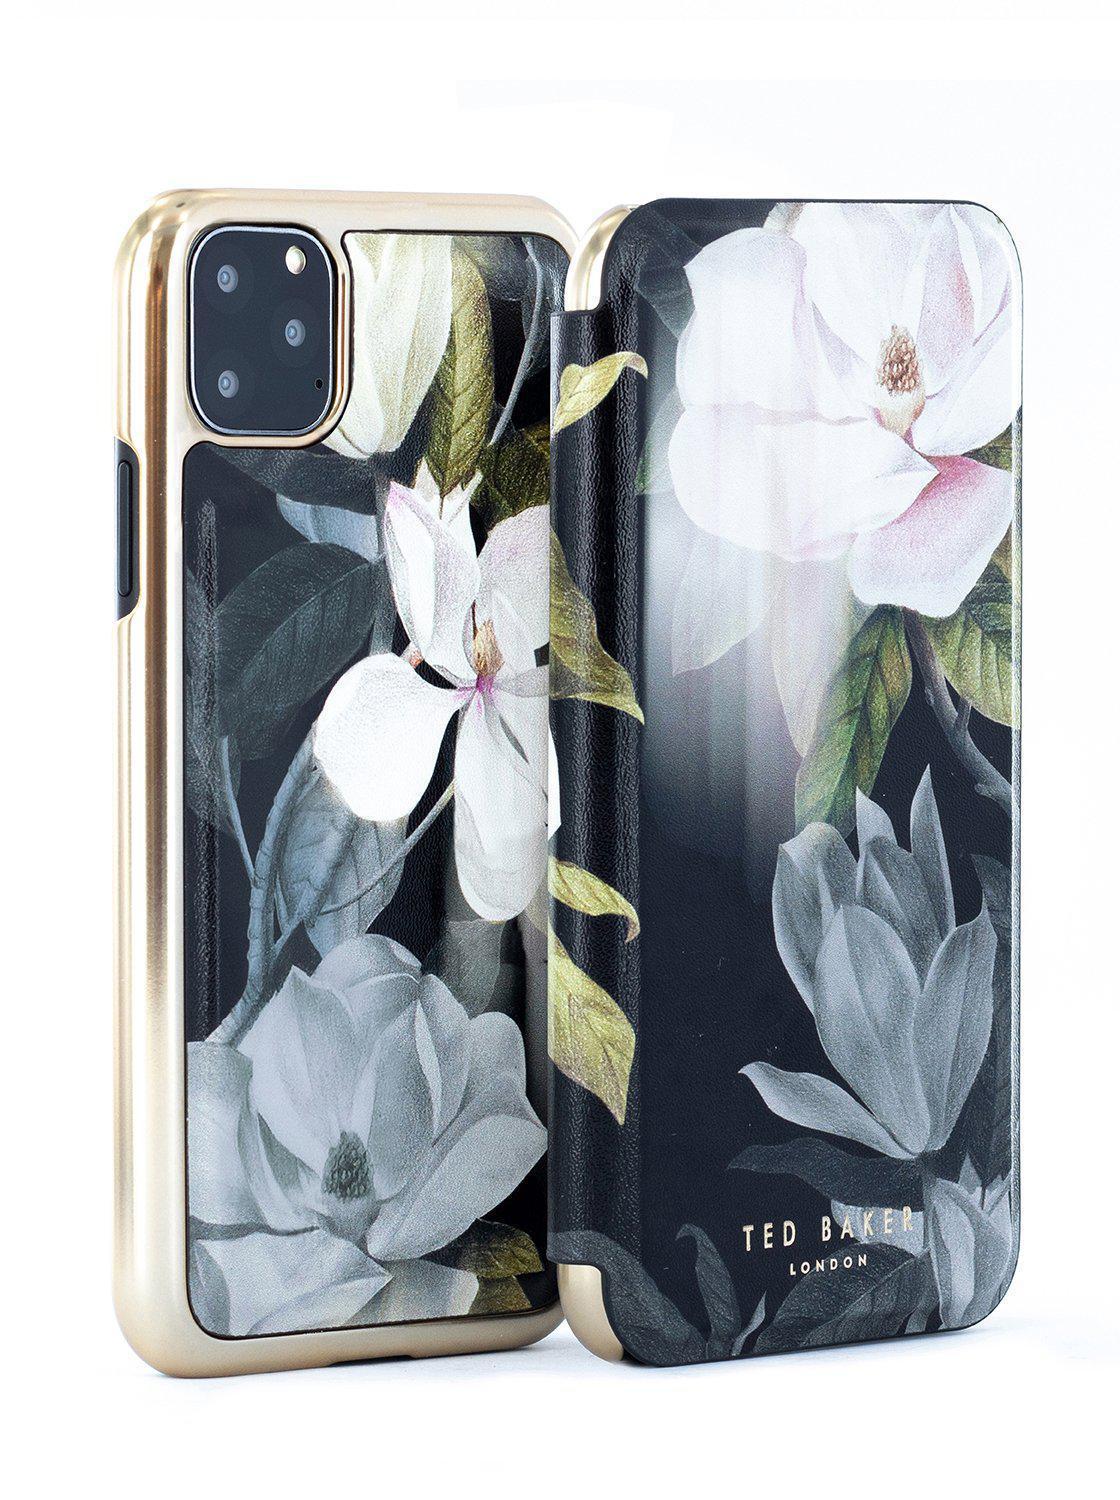 Ted Baker iPhone 11 Pro - Folio Case - Elegant Drop Protection Cover, Wireless Charging Compatible - Opal